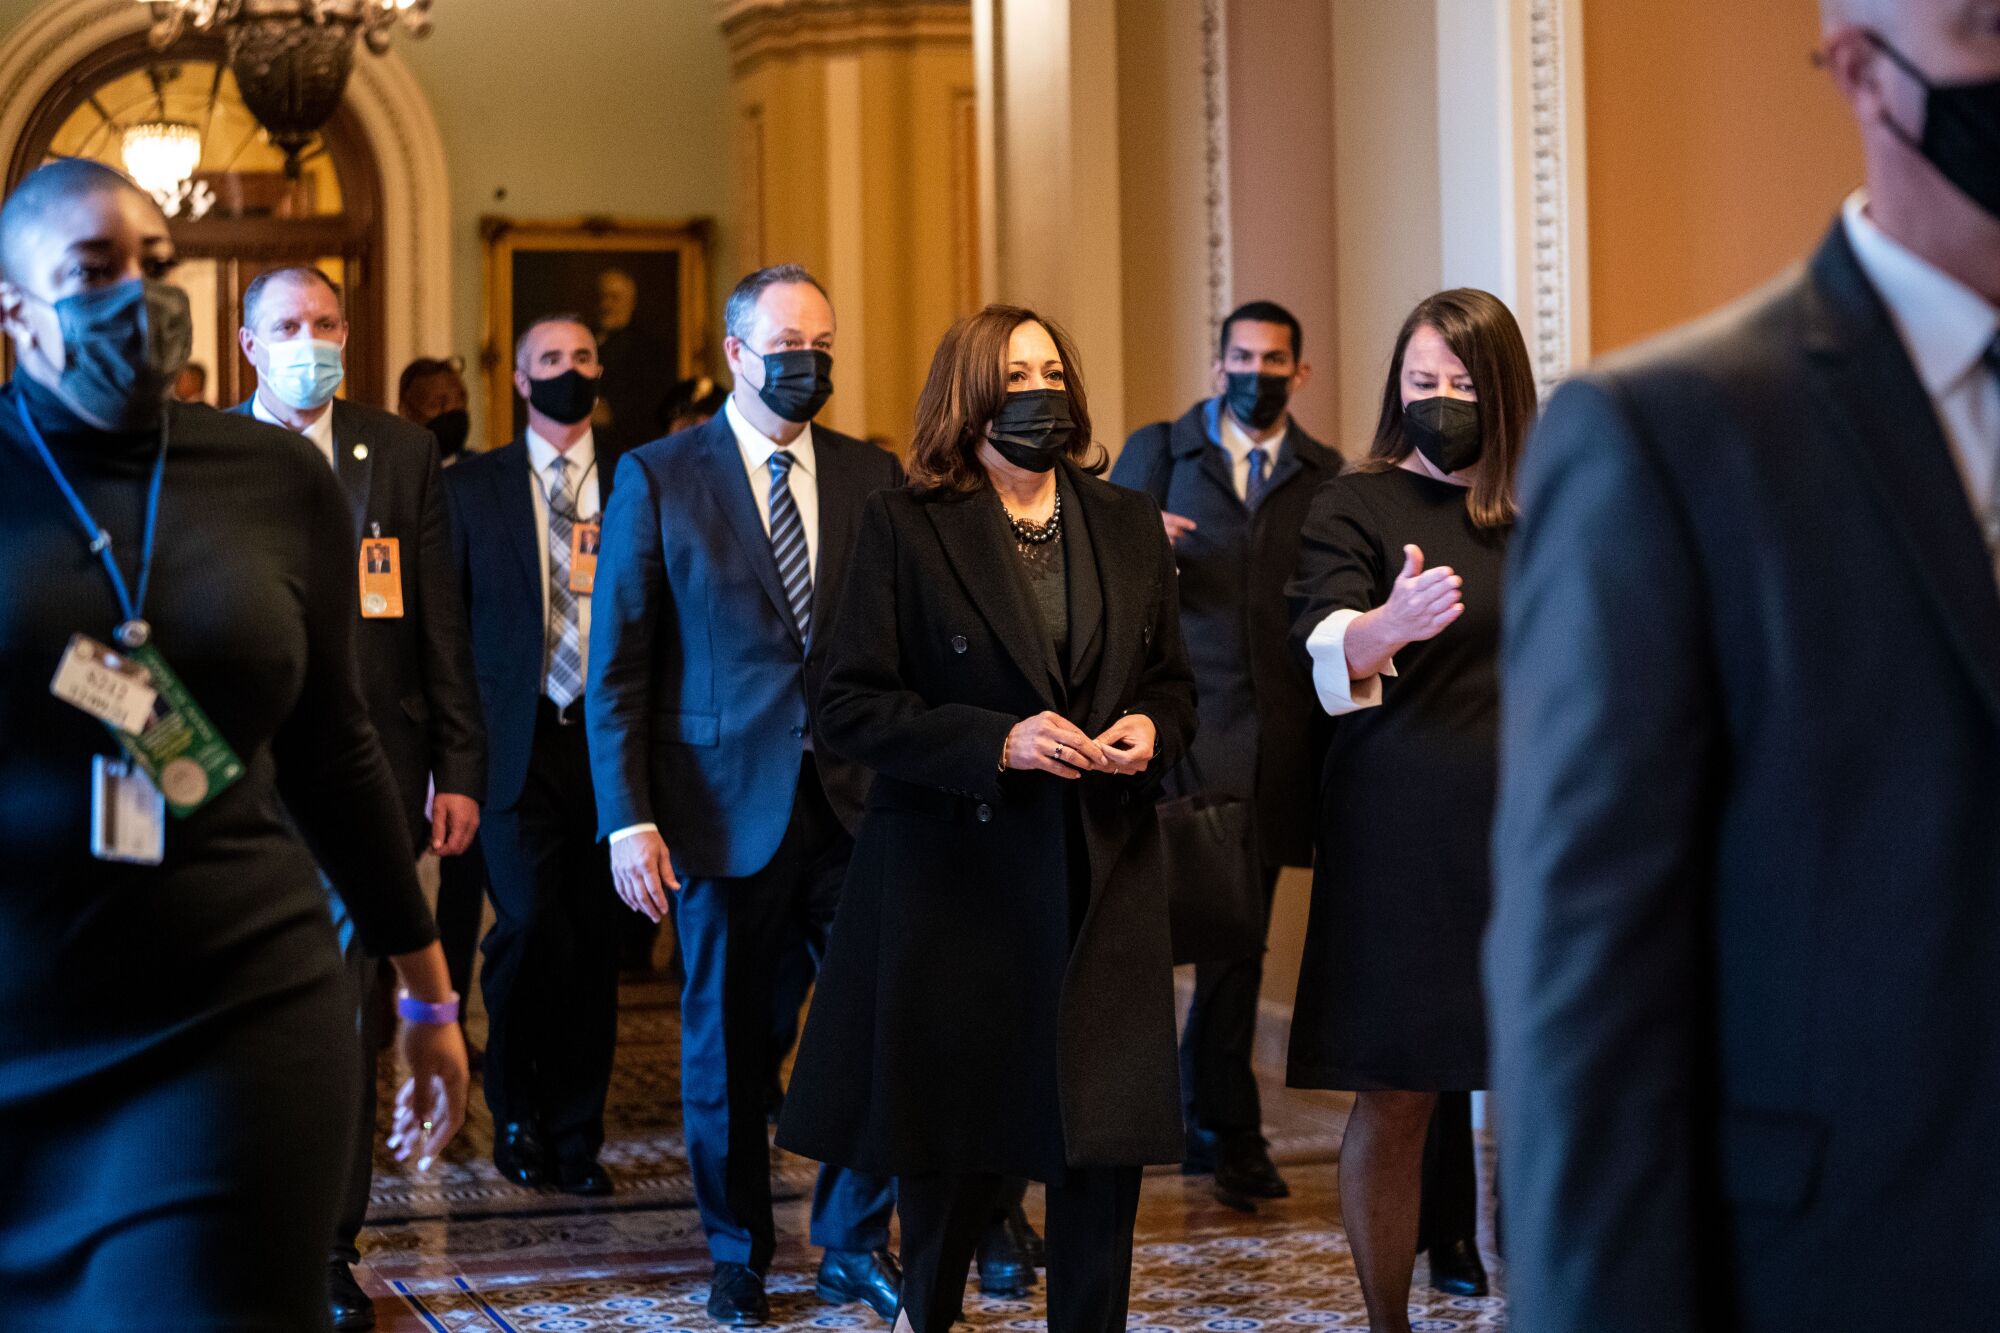 A group of men and women in dark suits and face masks walks down a hallway.